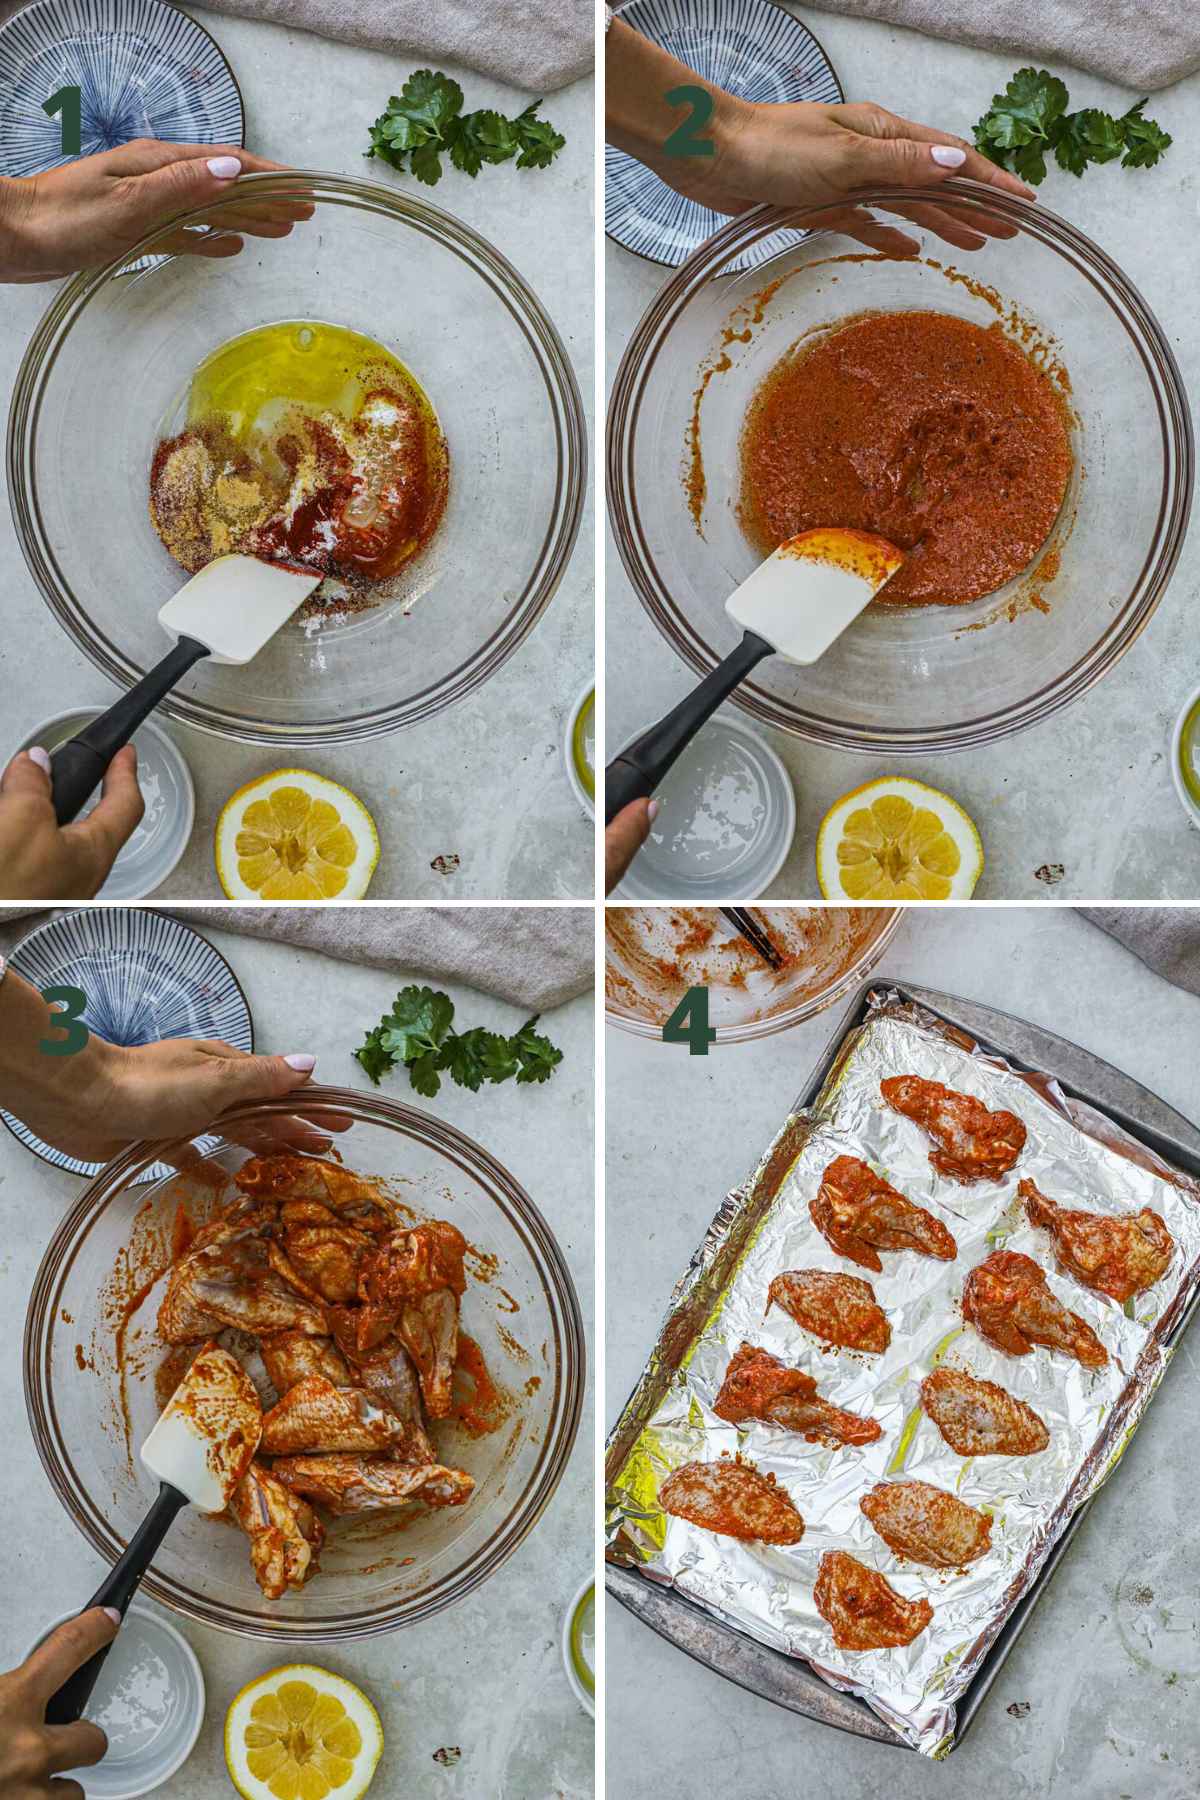 Steps to make honey lemon pepper chicken wings, mixing olive oil, lemon juice. baking powder, salt, pepper, garlic powder, and smoked paprika, tossing wings, and arranging the wings on a sheet pan.